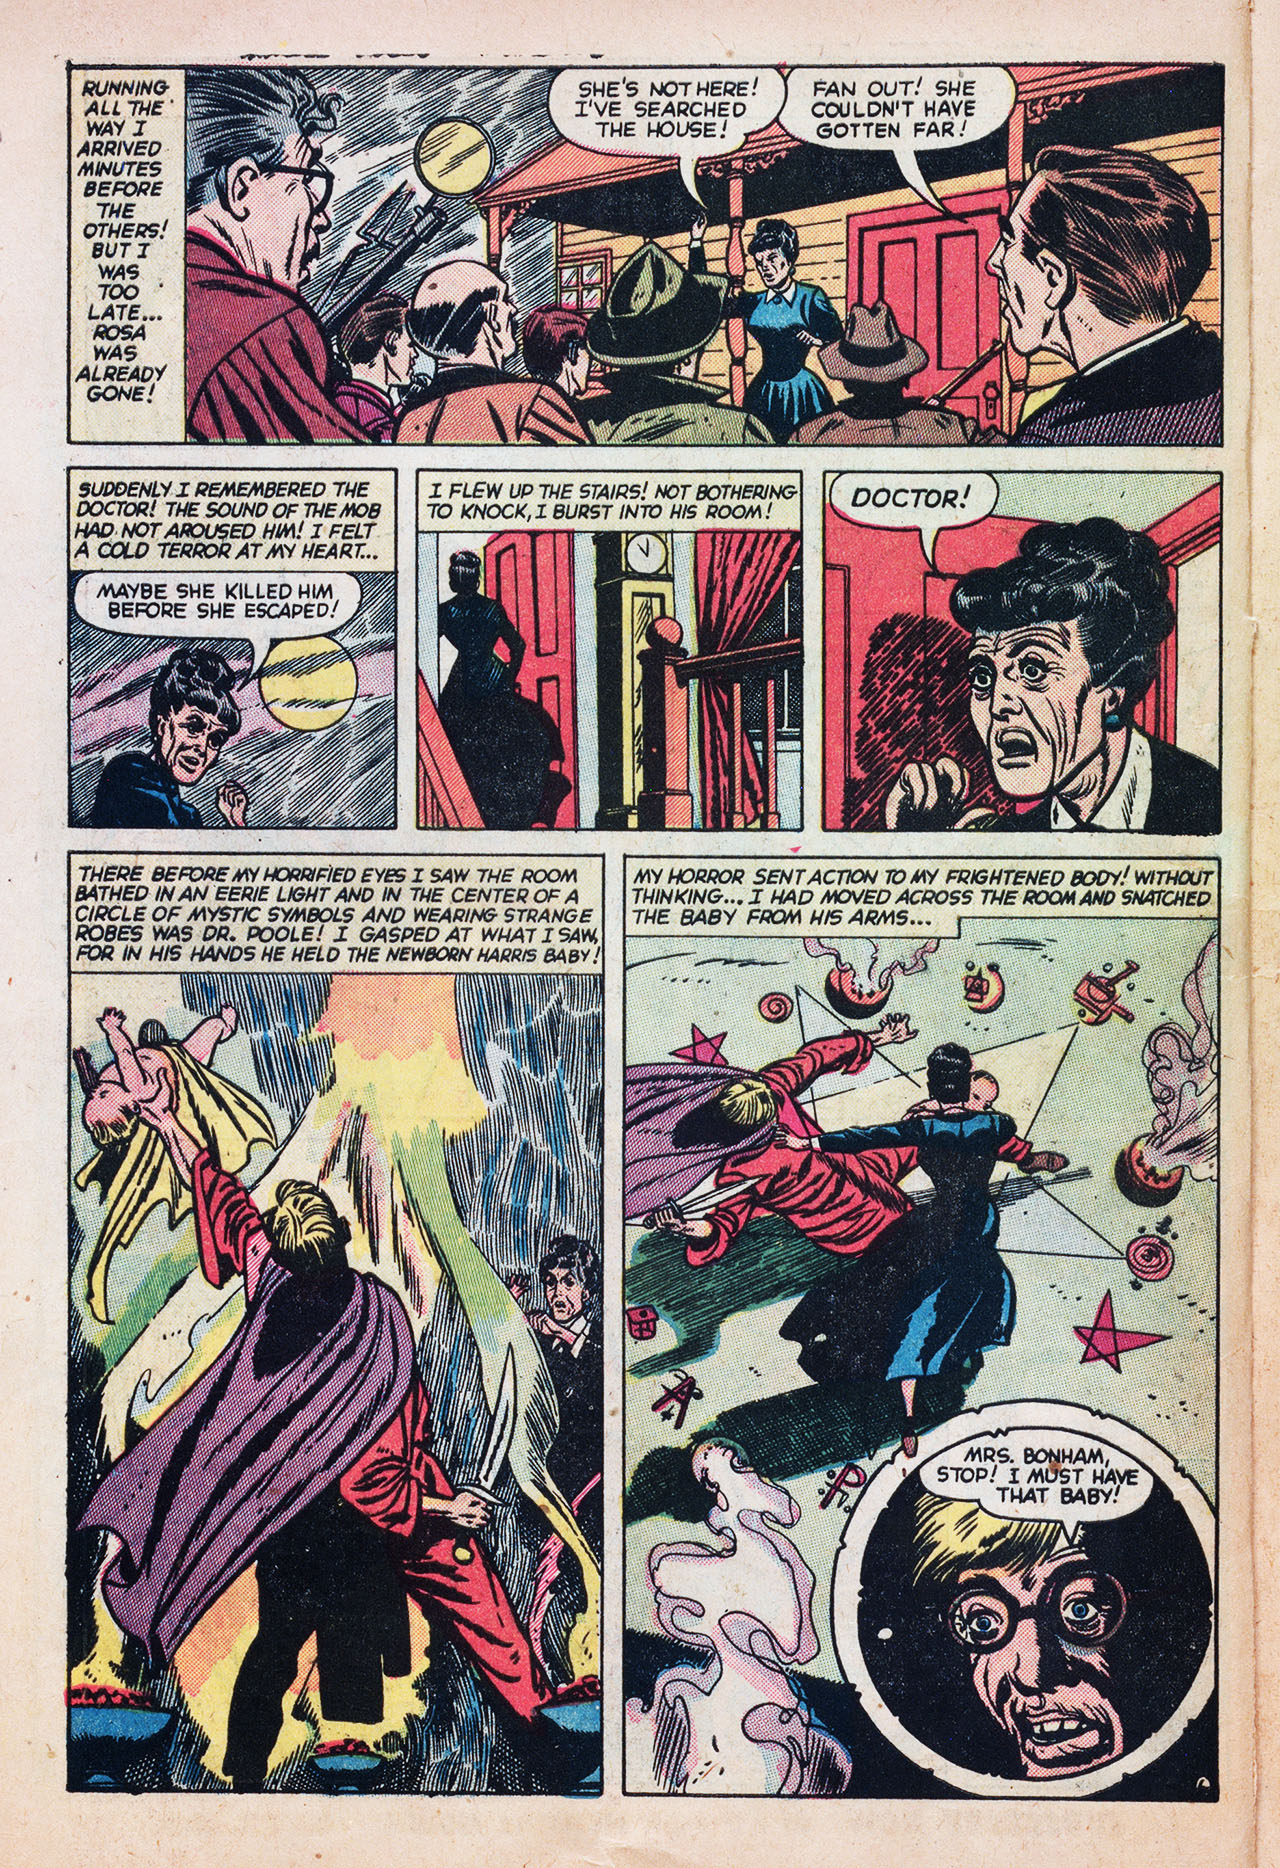 Marvel Tales (1949) 102 Page 7